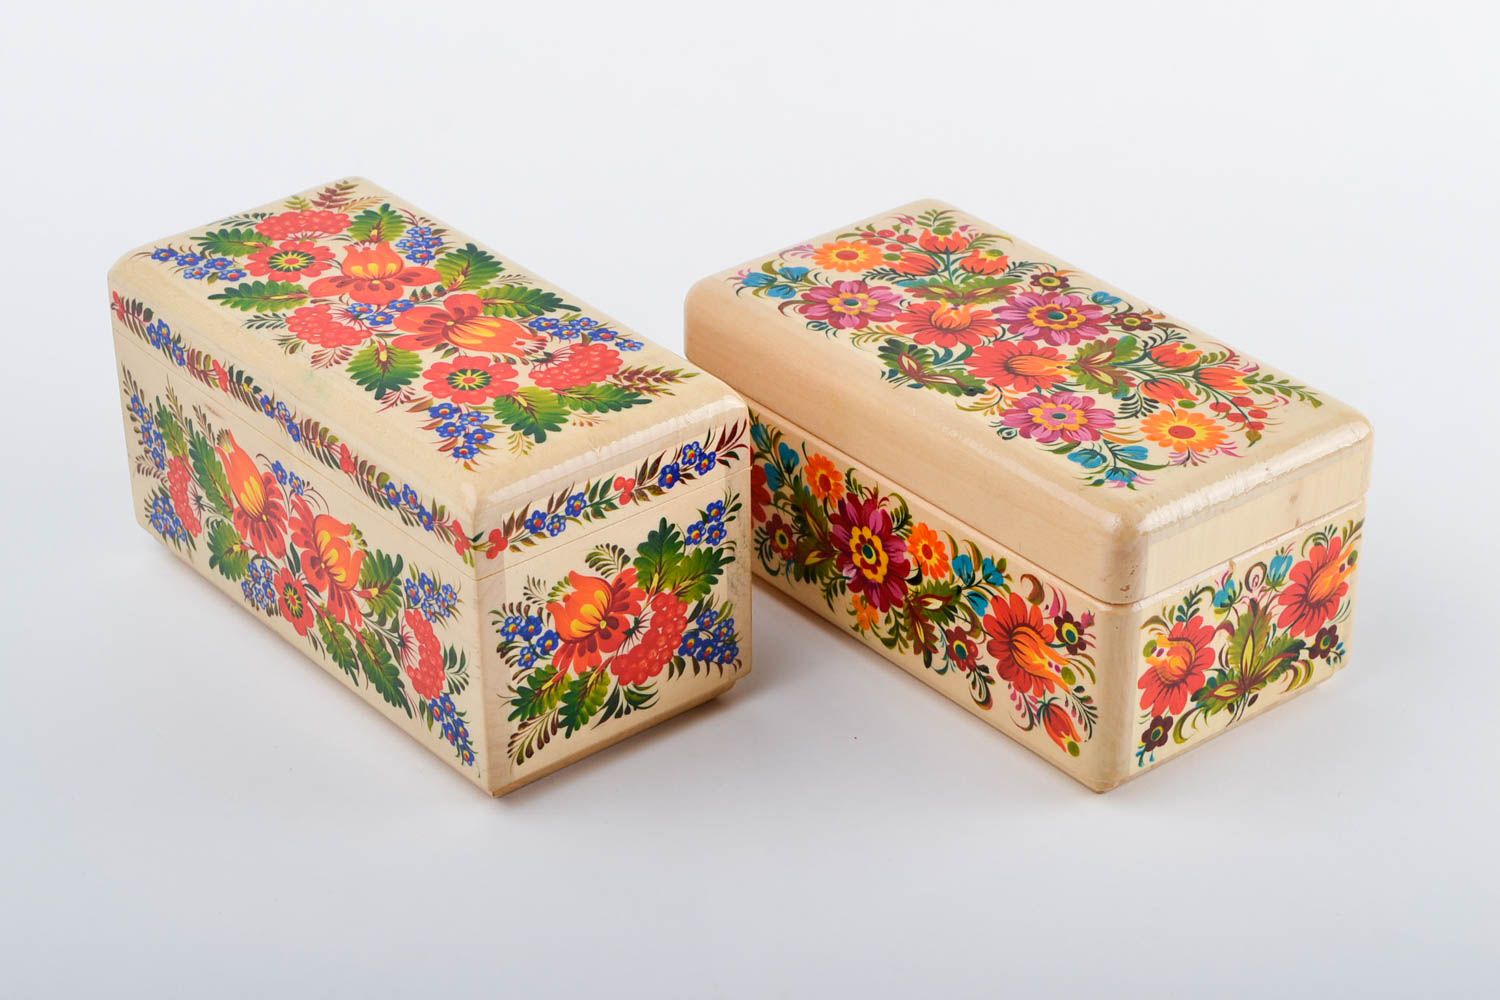 Handmade gifts wooden jewelry boxes jewellery gift boxes rustic home decor photo 5